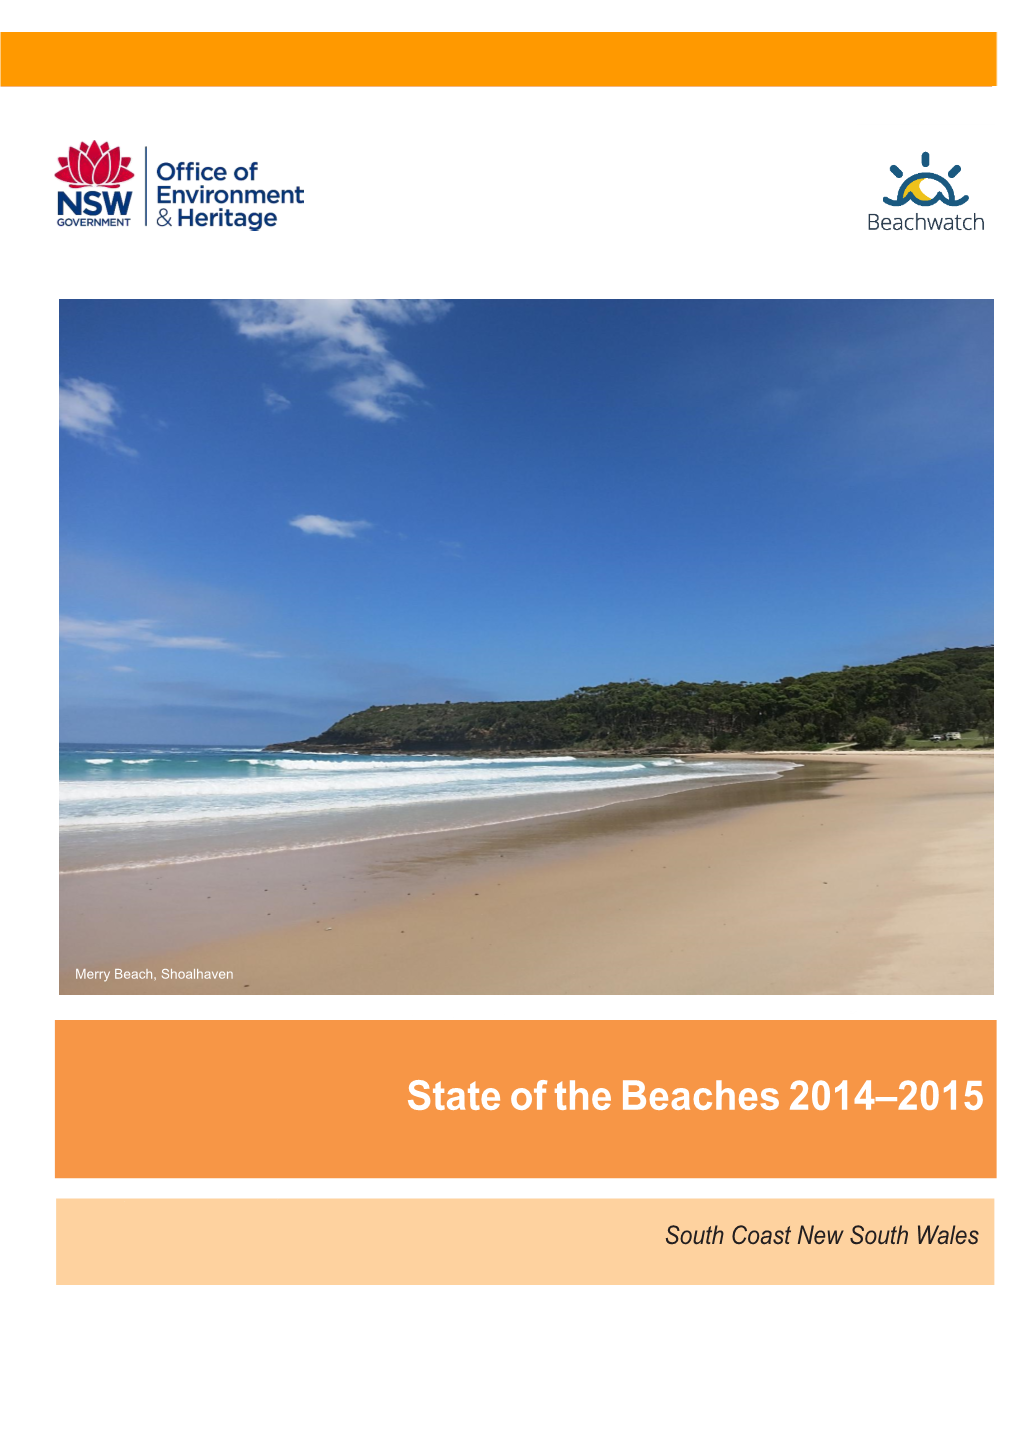 State of the Beaches 2014-2015: South Coast New South Wales